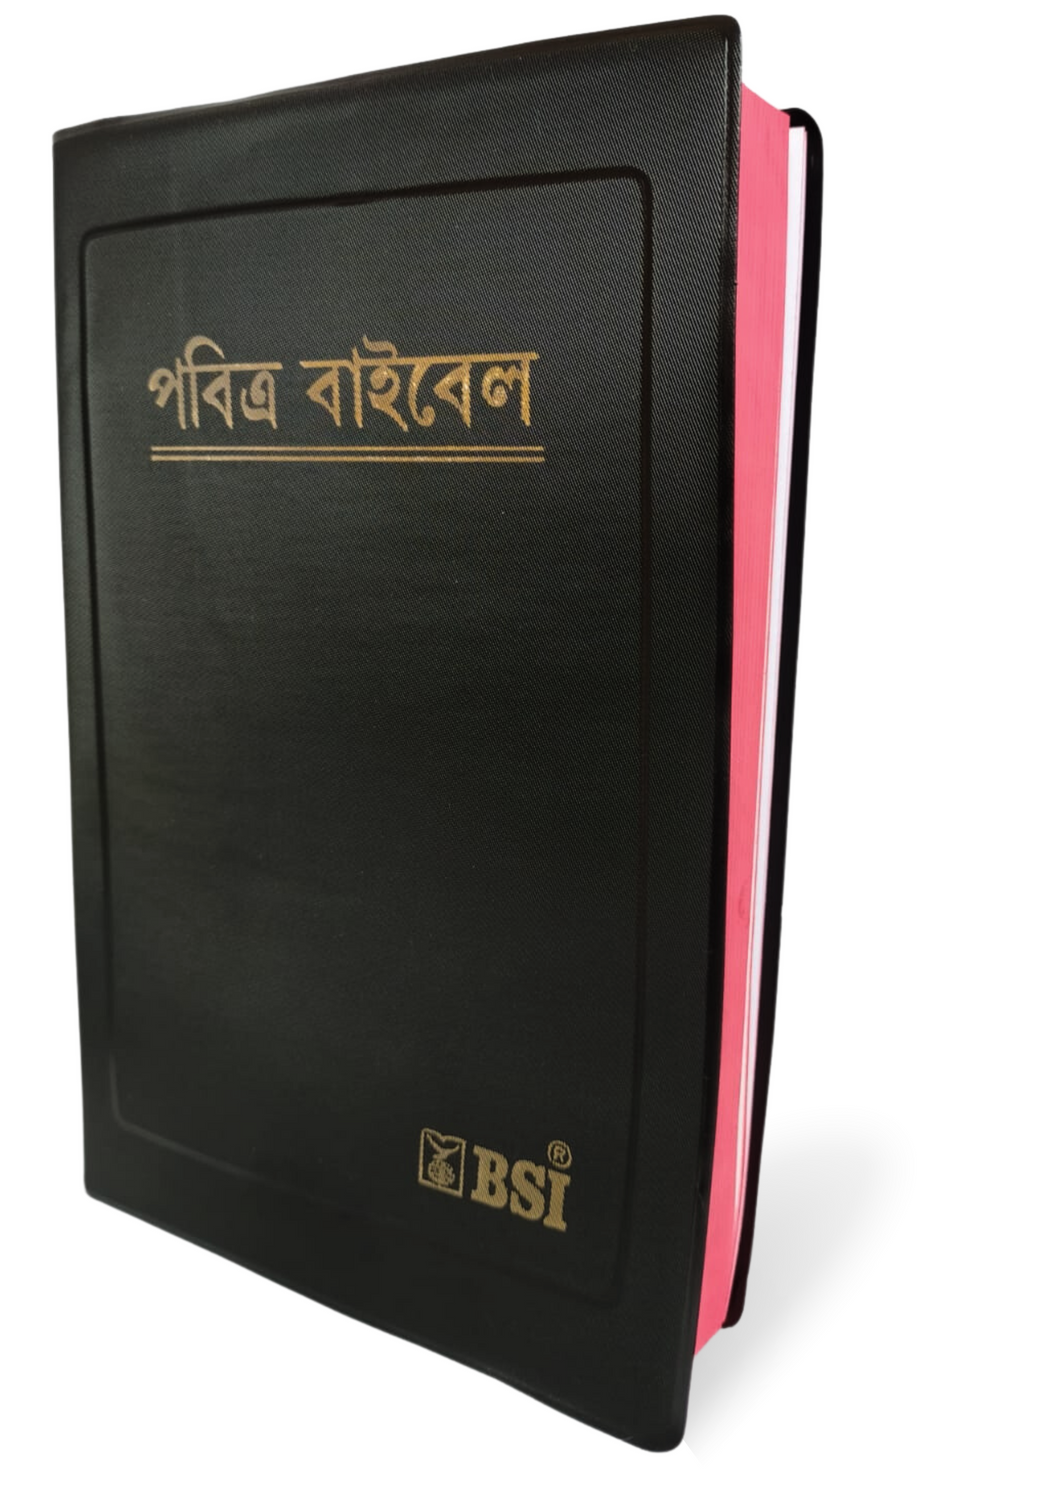 Assamese Holy Bible - BSI version containing Old and New Testament. Packing, Delivery Included